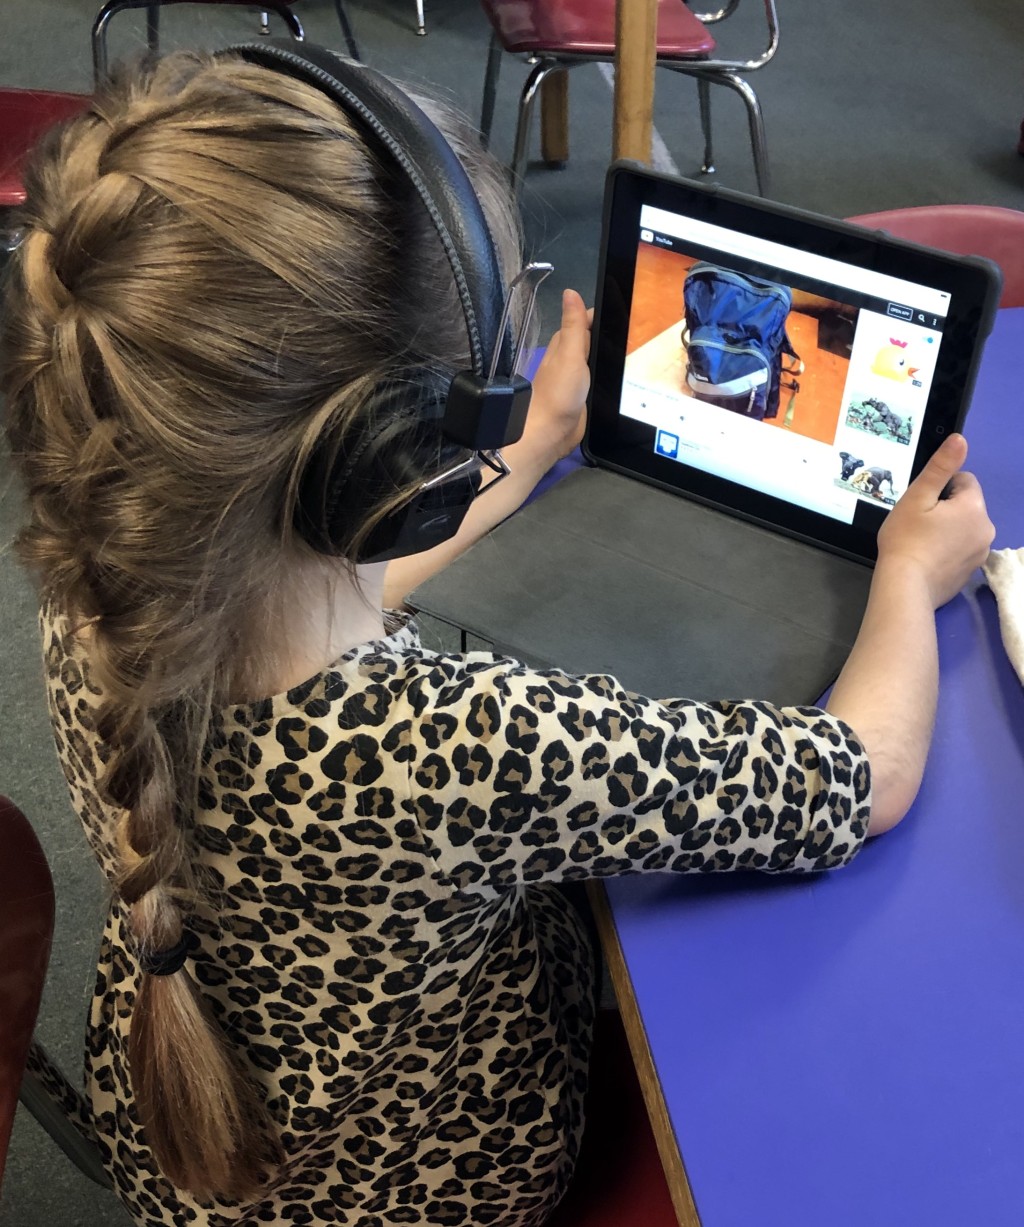 Students scan a QR code using an iPad and listen to the child’s story through headphones